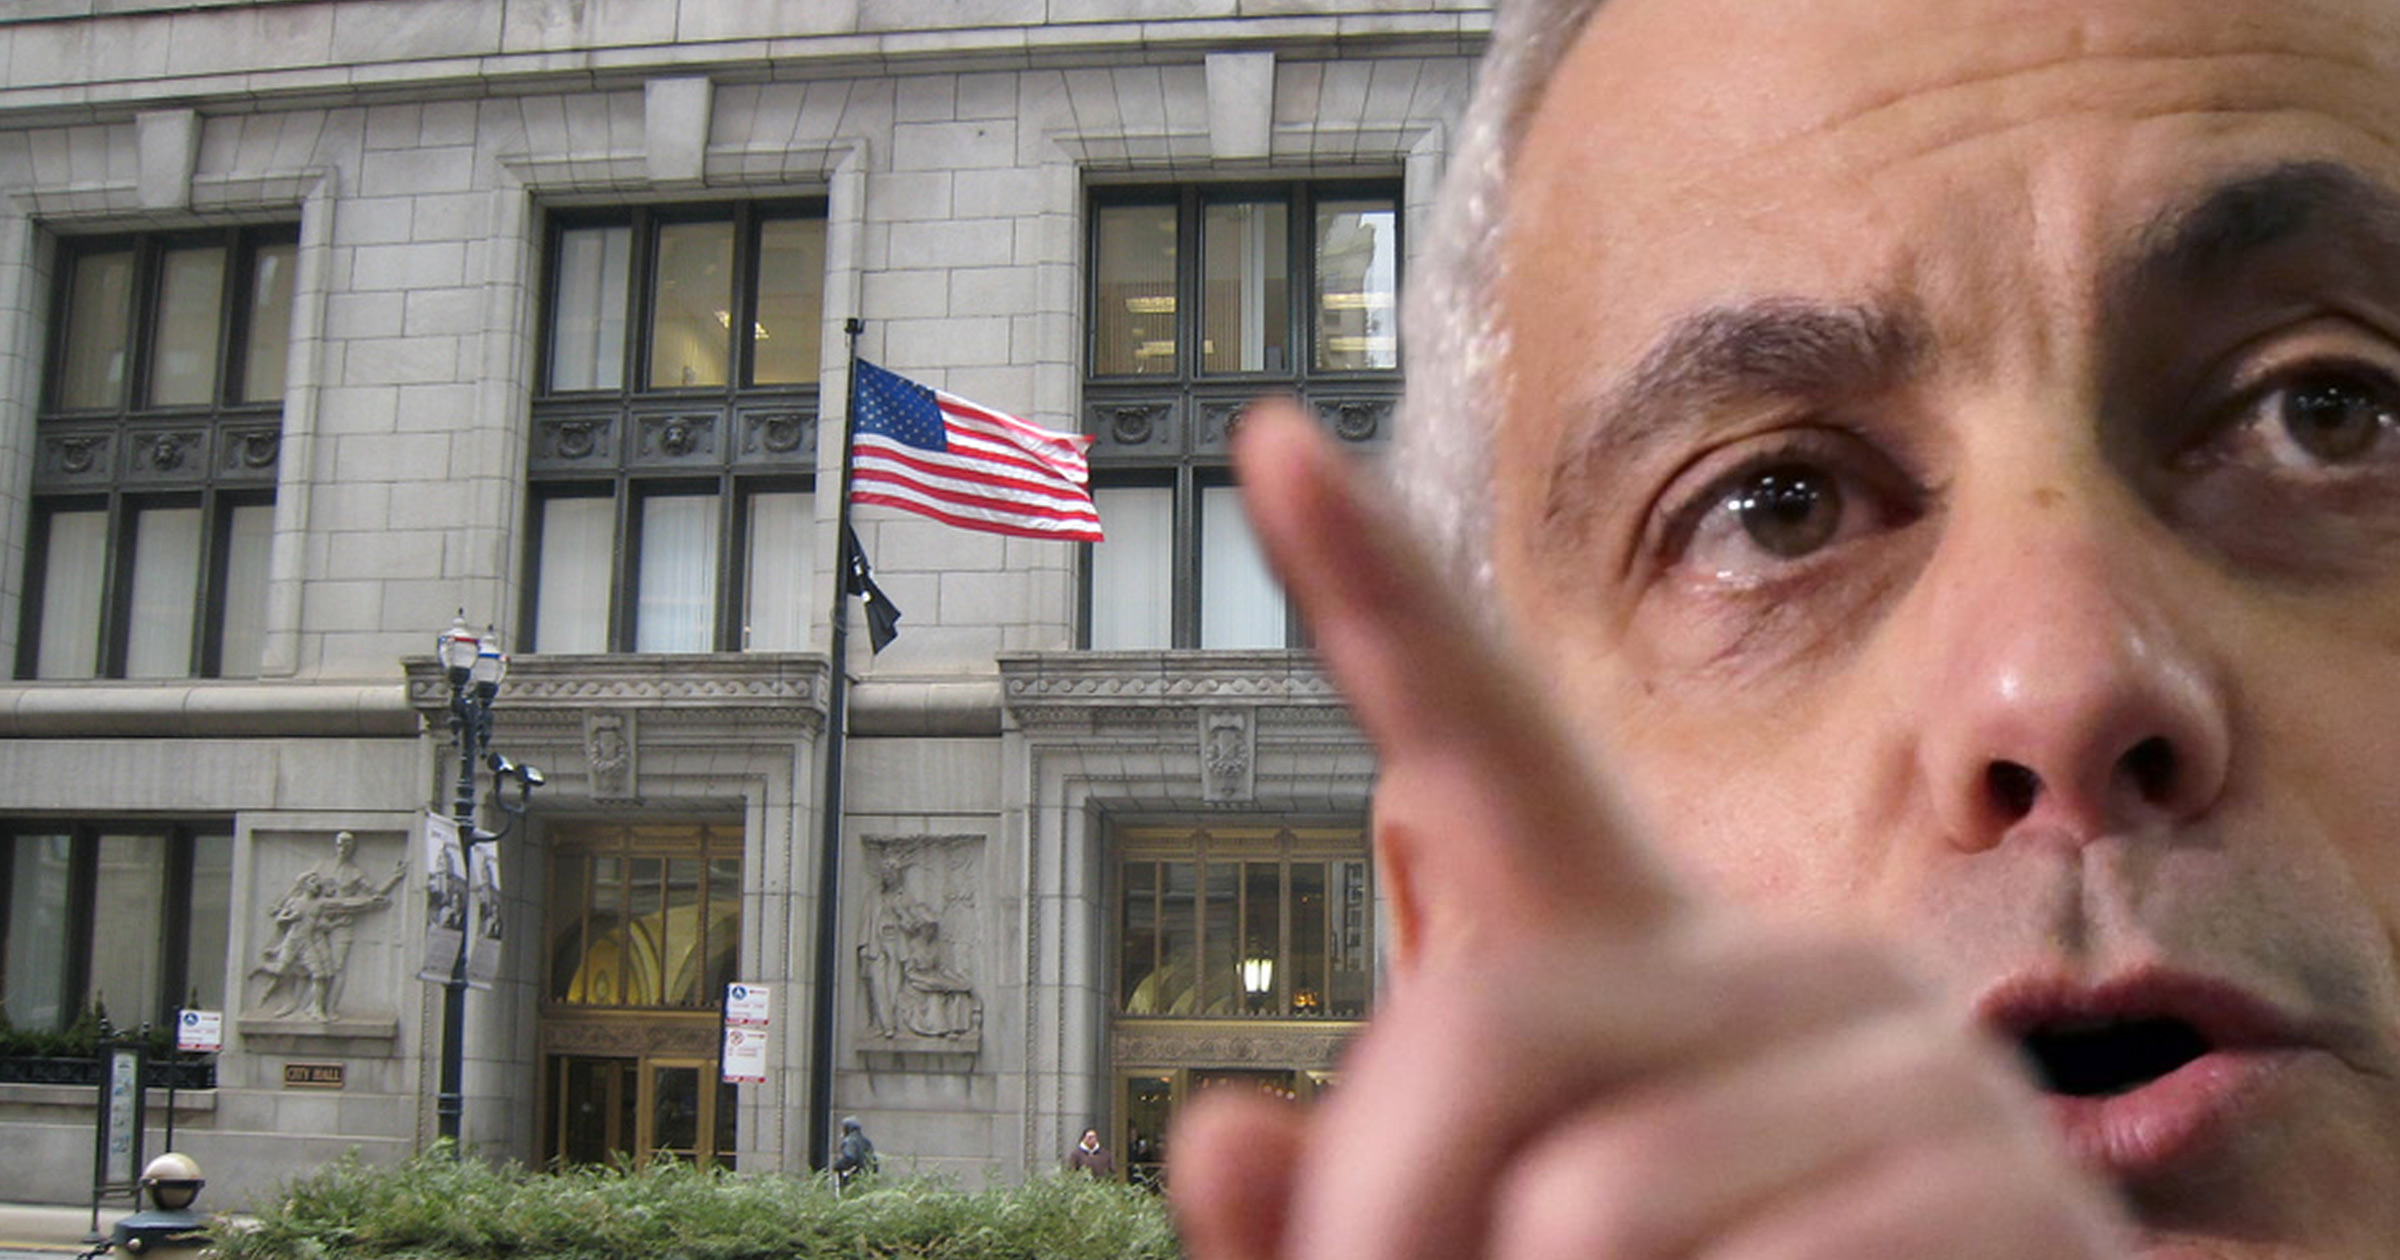 City of Chicago Fires Moody's Investors Service is Rahm Emanuel exercising political payback?